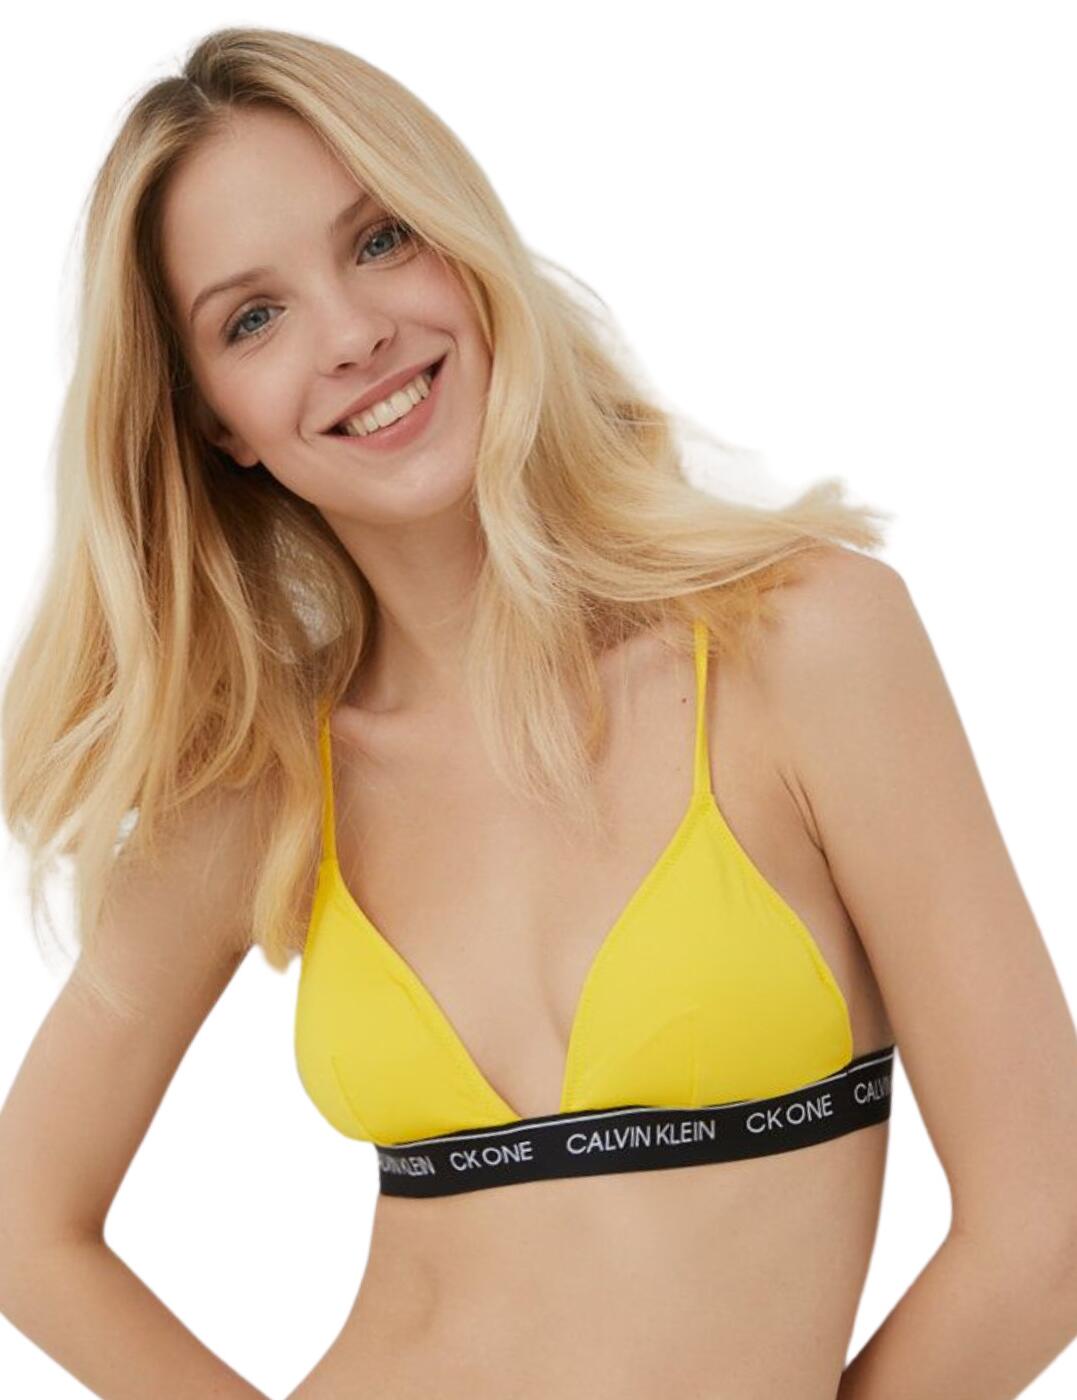 infinite cool in the middle of nowhere KW0KW01758 Calvin Klein CK One Triangle Bikini Top | KW0KW01758 Bold Yellow  | Belle-Lingerie.co.uk